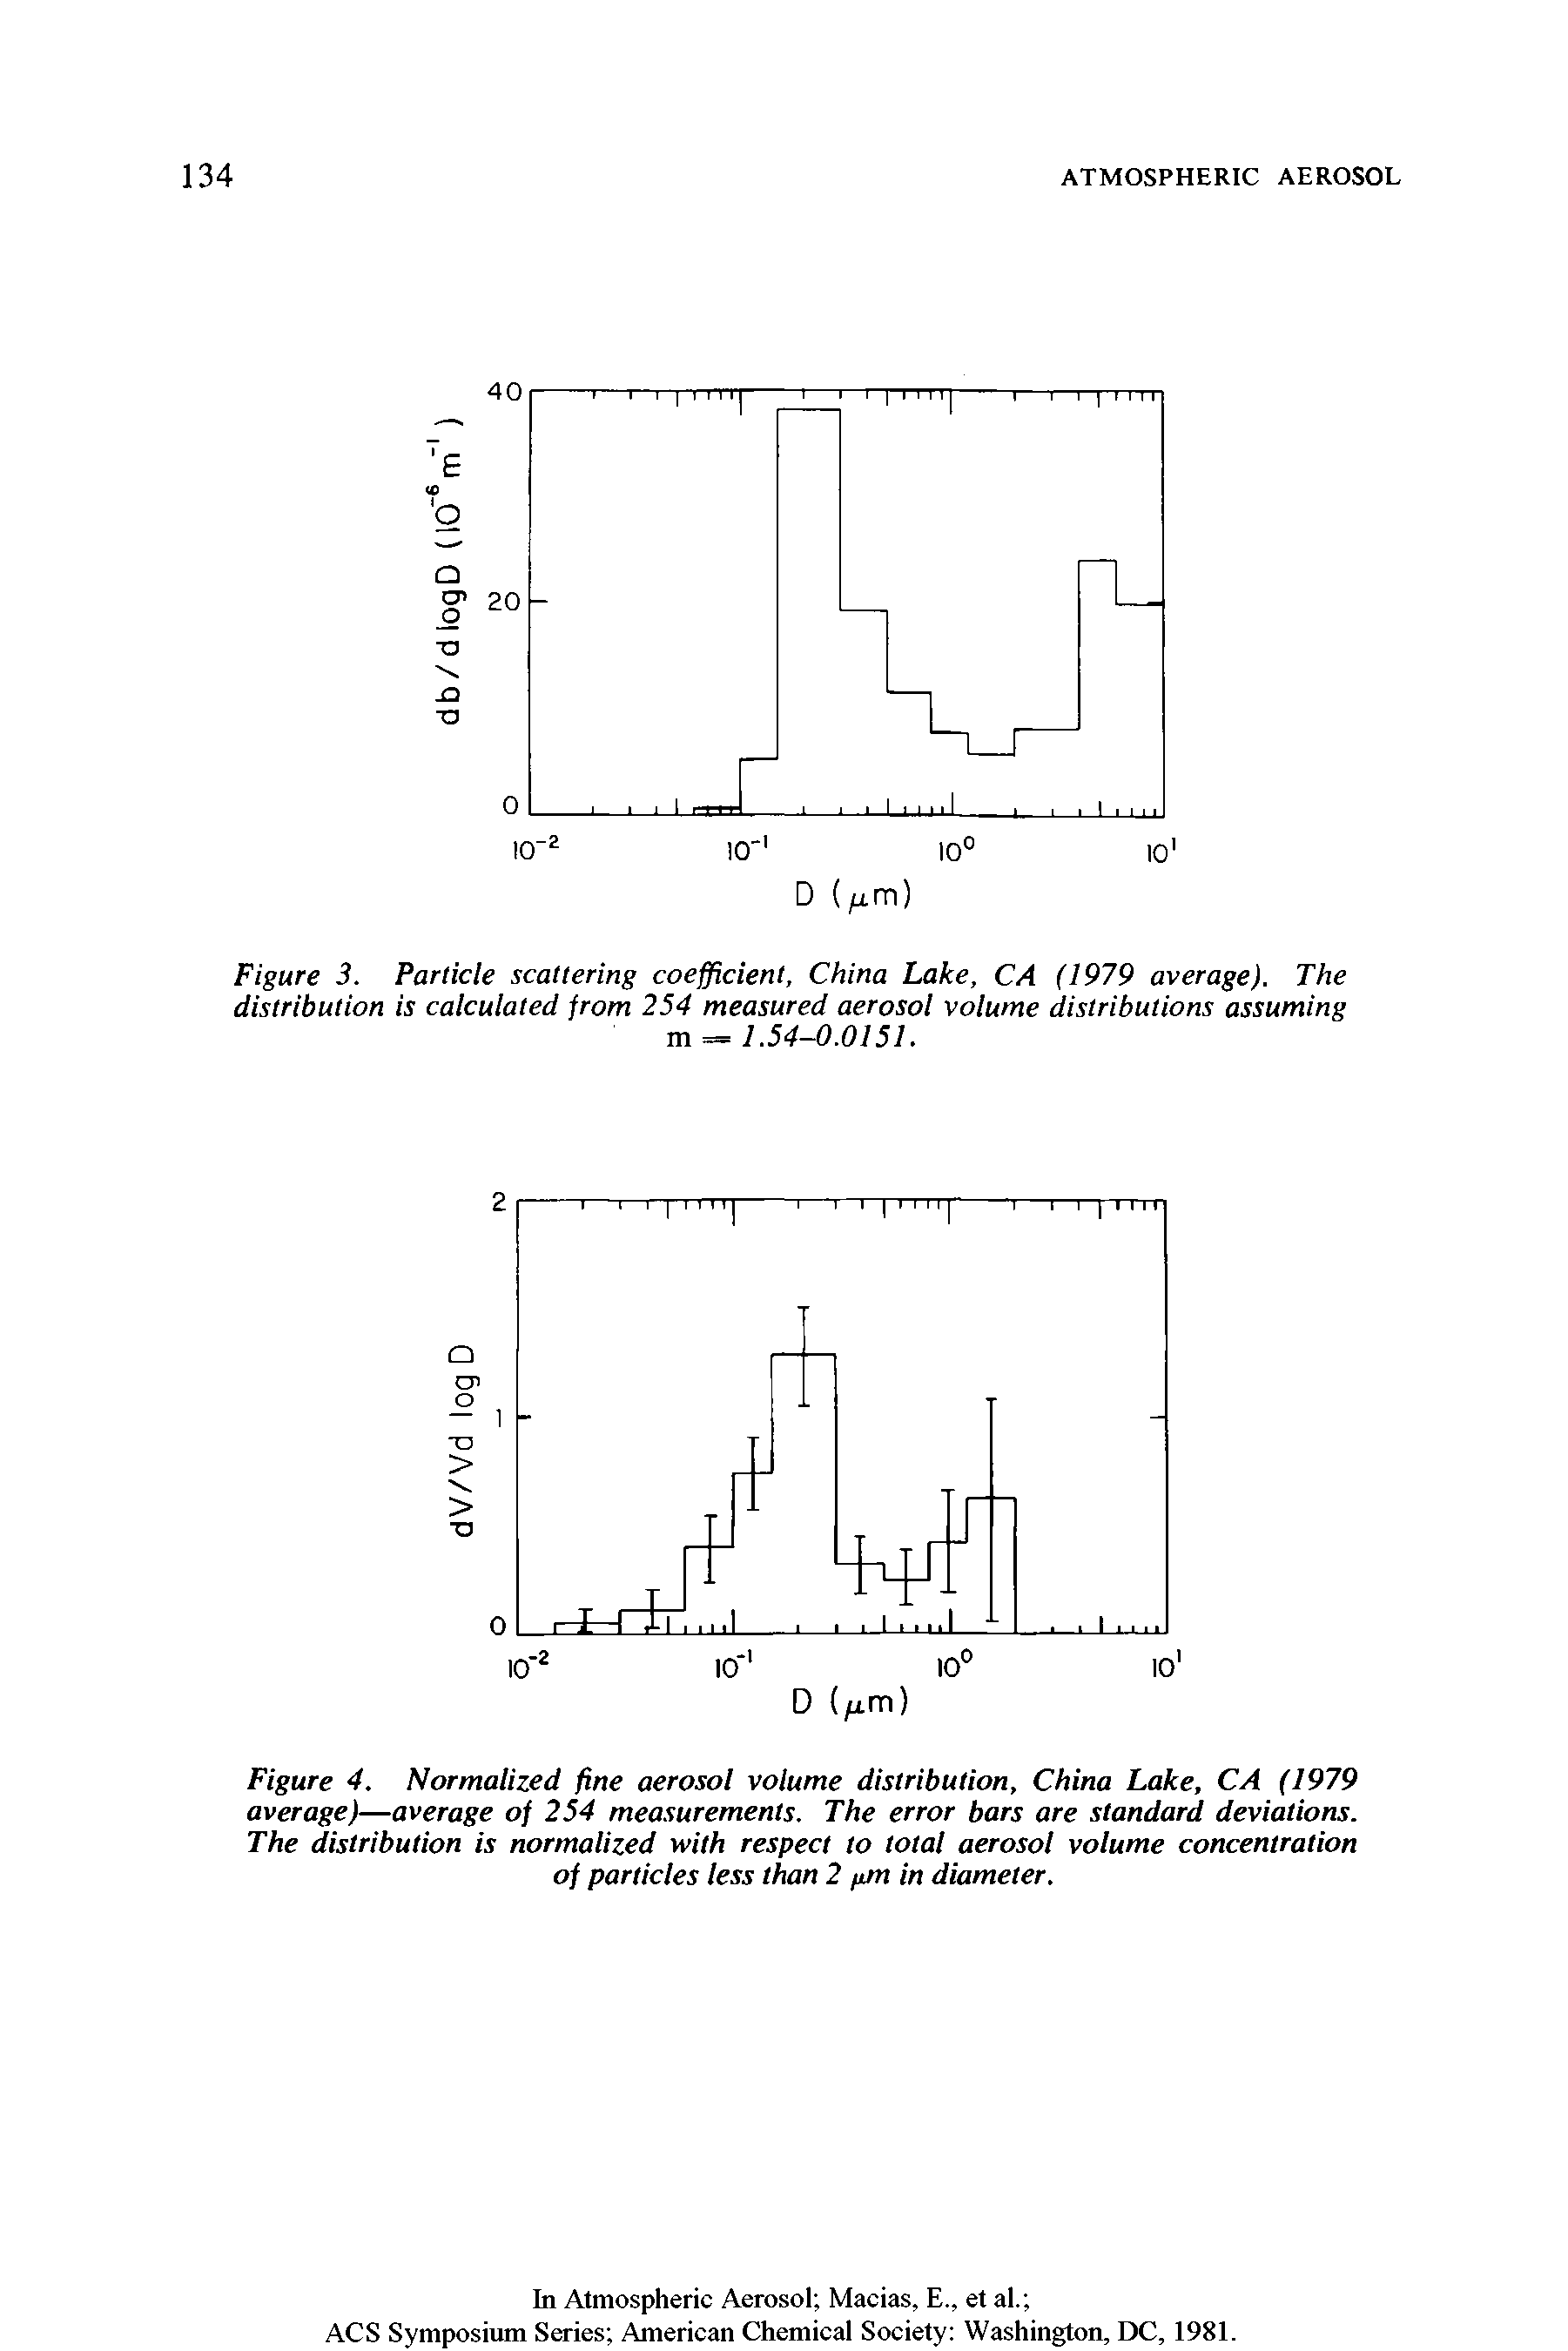 Figure 4. Normalized fine aerosol volume distribution, China Lake, CA (1979 average)—average of 254 measurements. The error bars are standard deviations. The distribution is normalized with respect to total aerosol volume concentration of particles less than 2 fim in diameter.